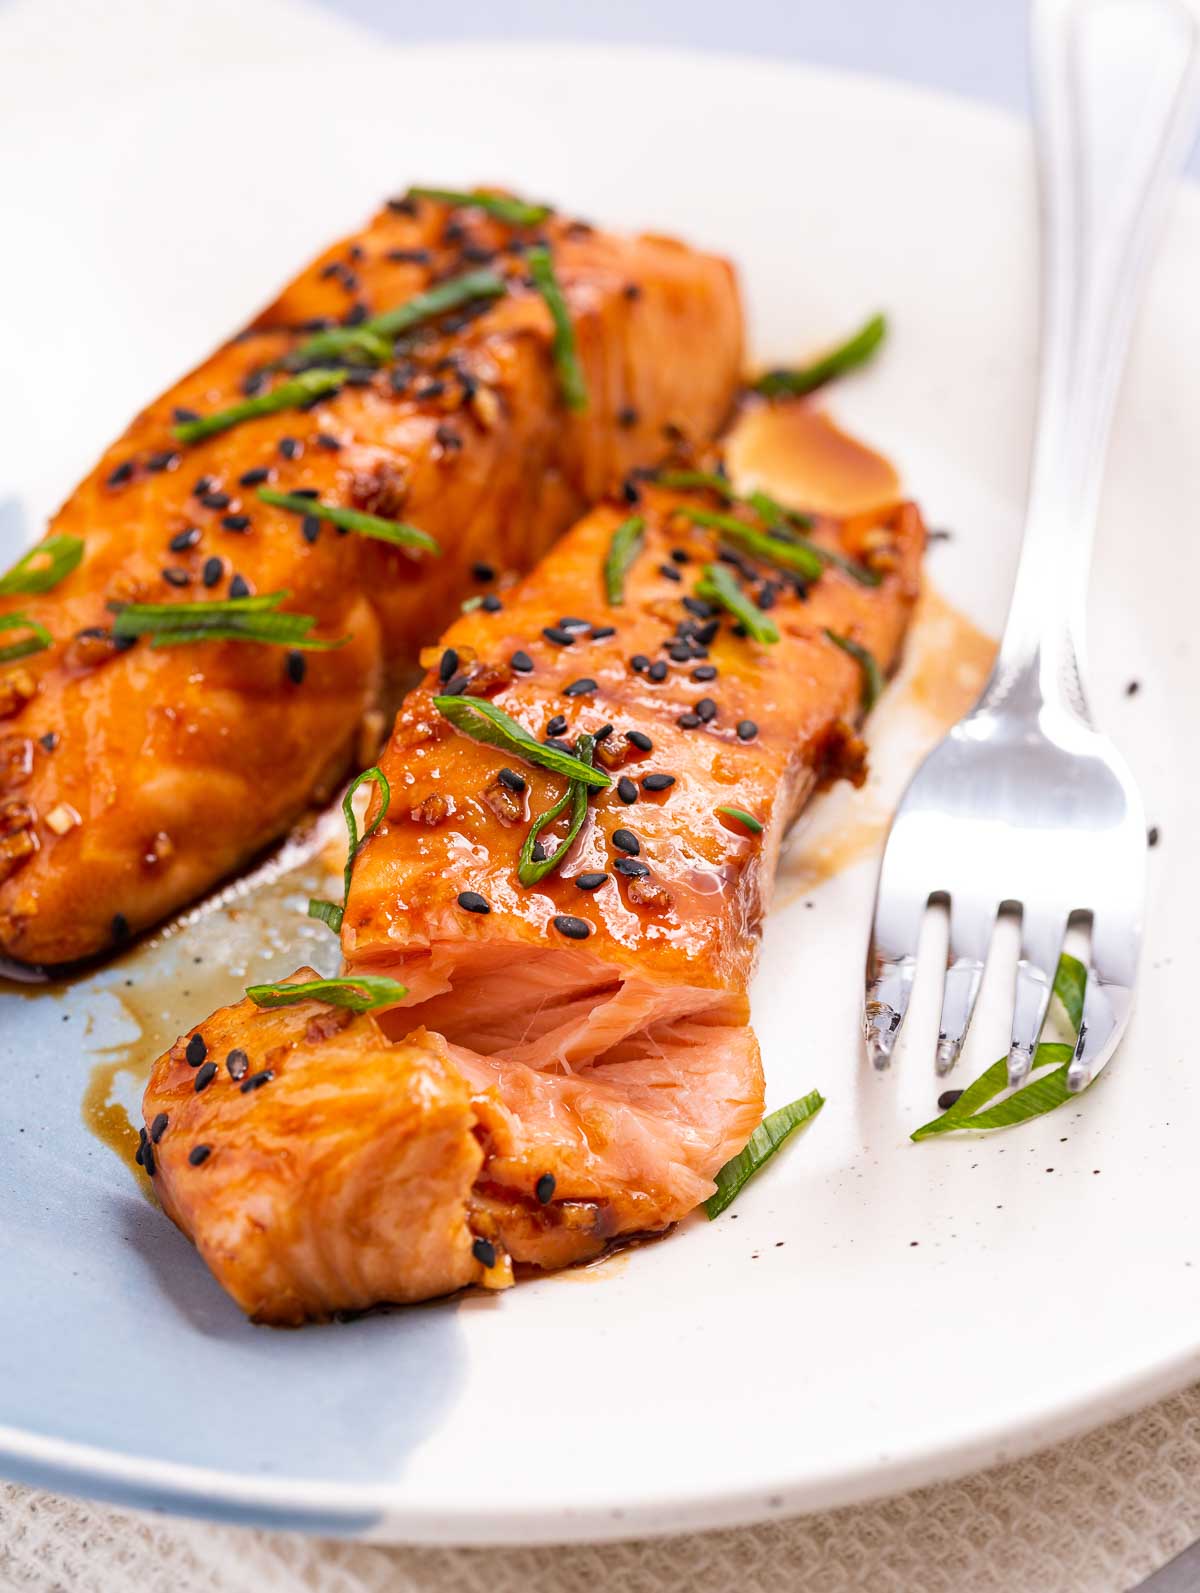 Two salmon fillets with a maple ginger glaze and garnished with black sesame seeds and green onion.